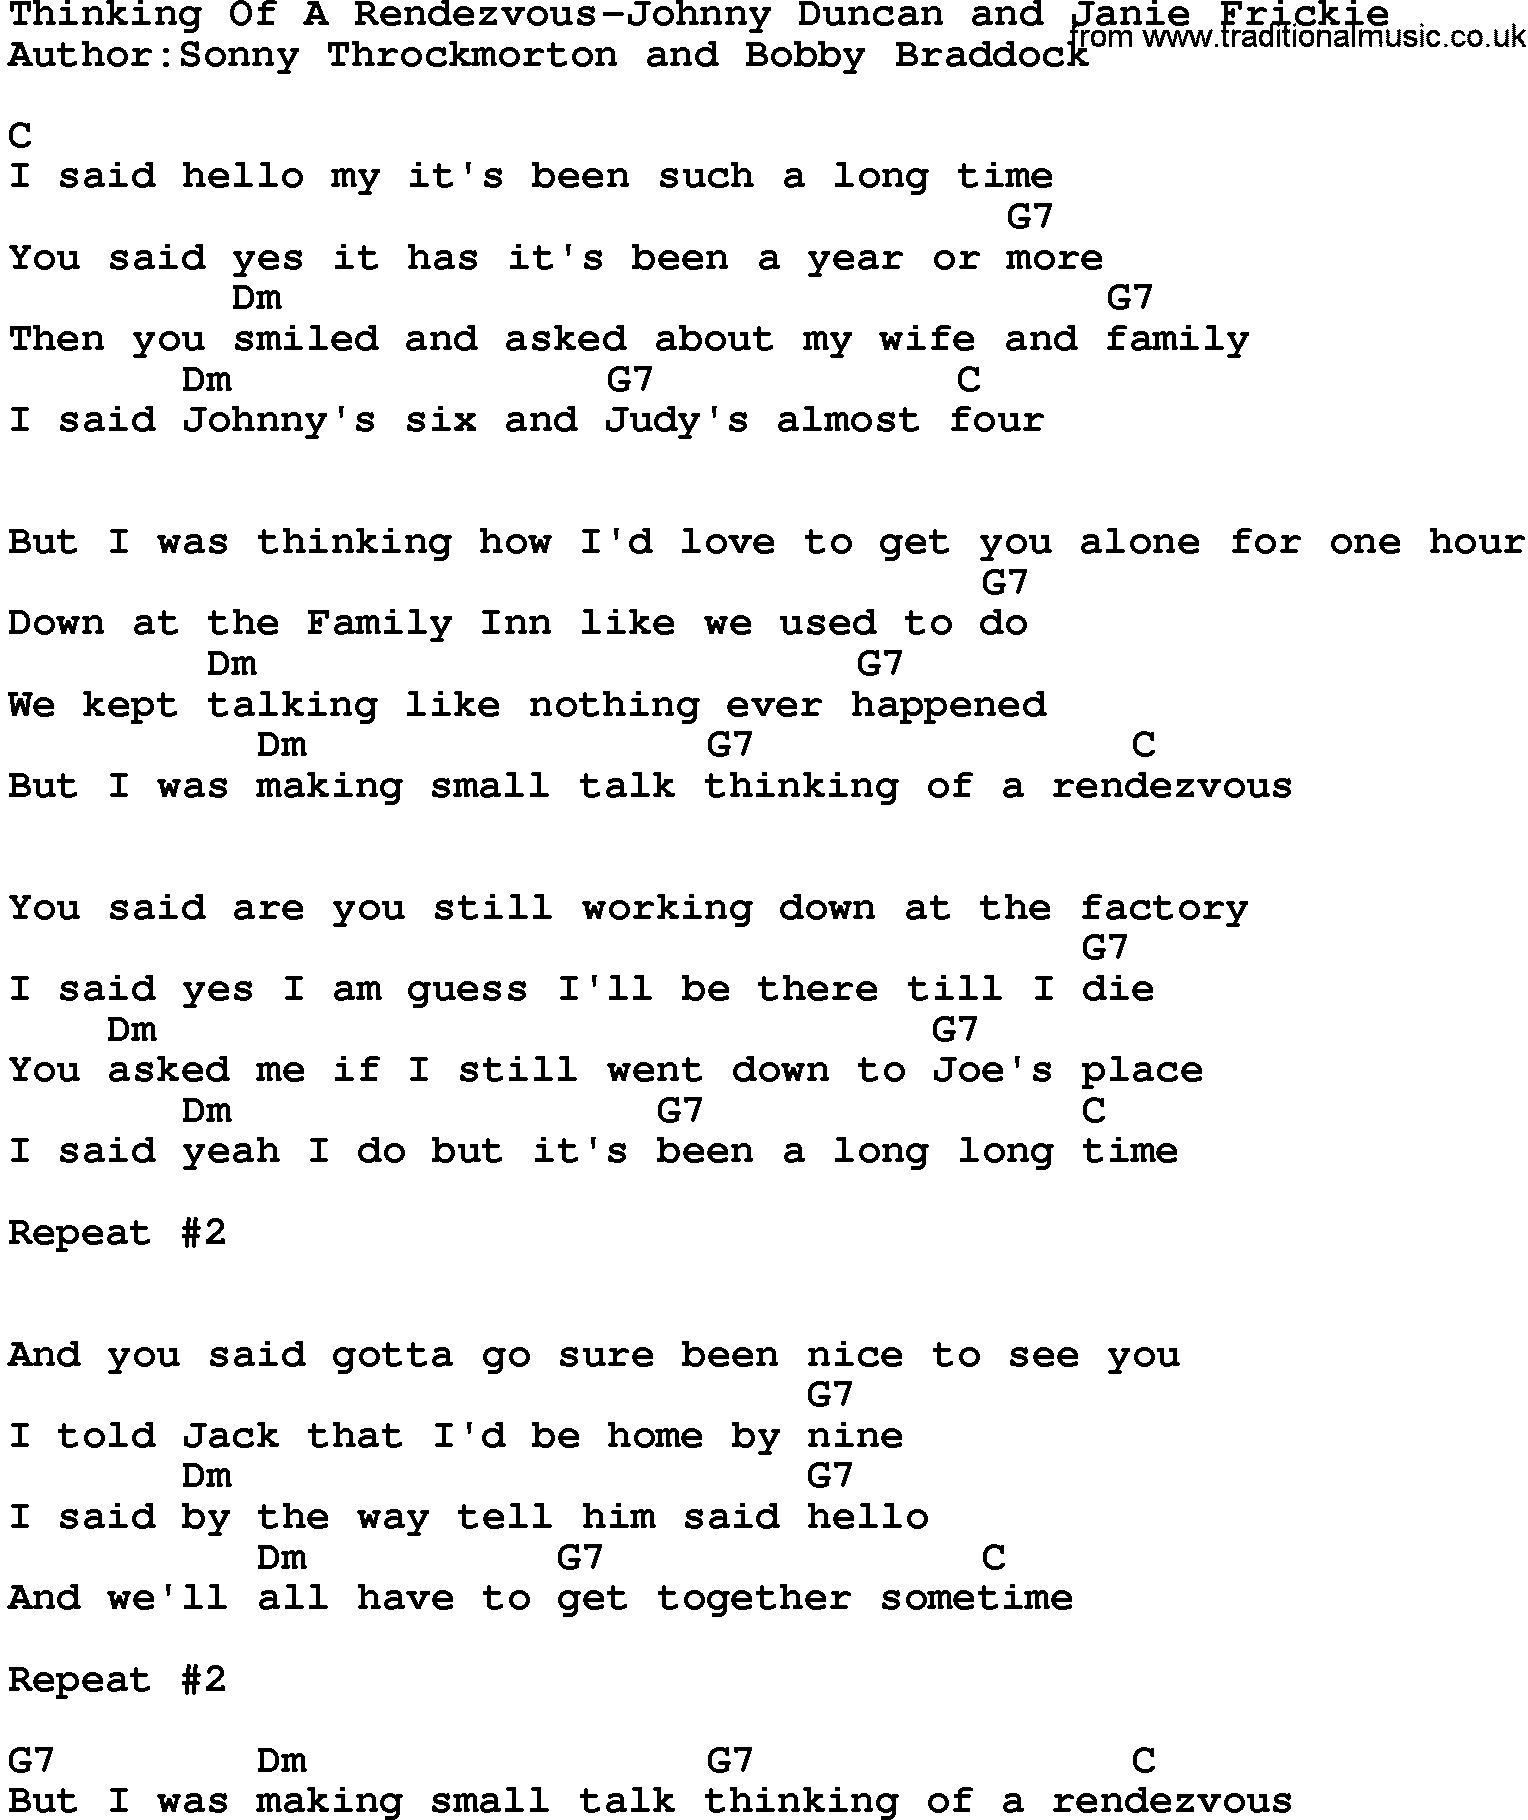 Country music song: Thinking Of A Rendezvous-Johnny Duncan And Janie Frickie lyrics and chords